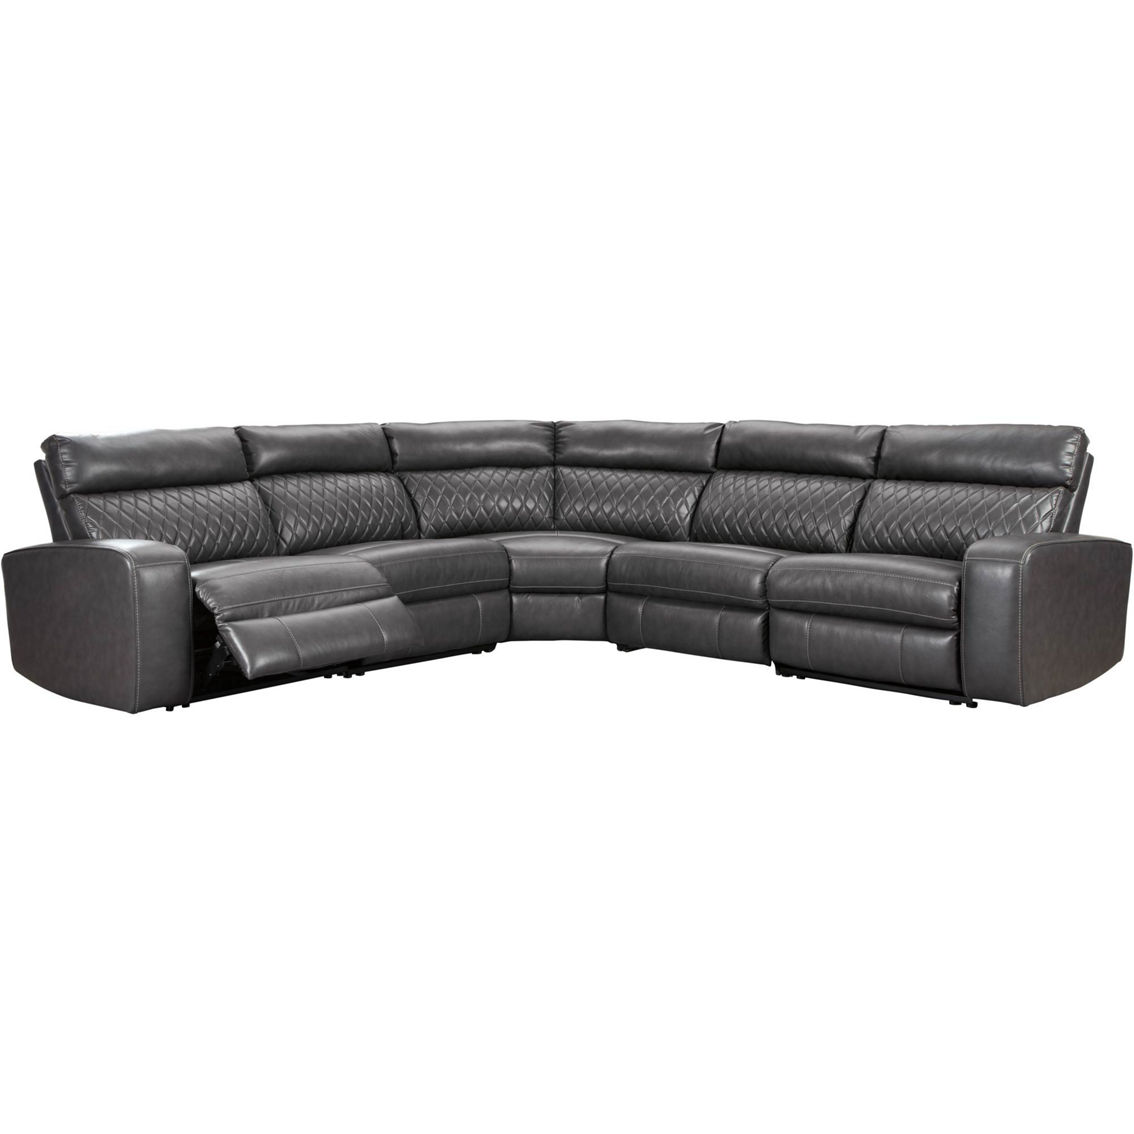 Signature Design by Ashley Samperstone 5 pc. Sectional with 3 Reclining Seats - Image 2 of 4